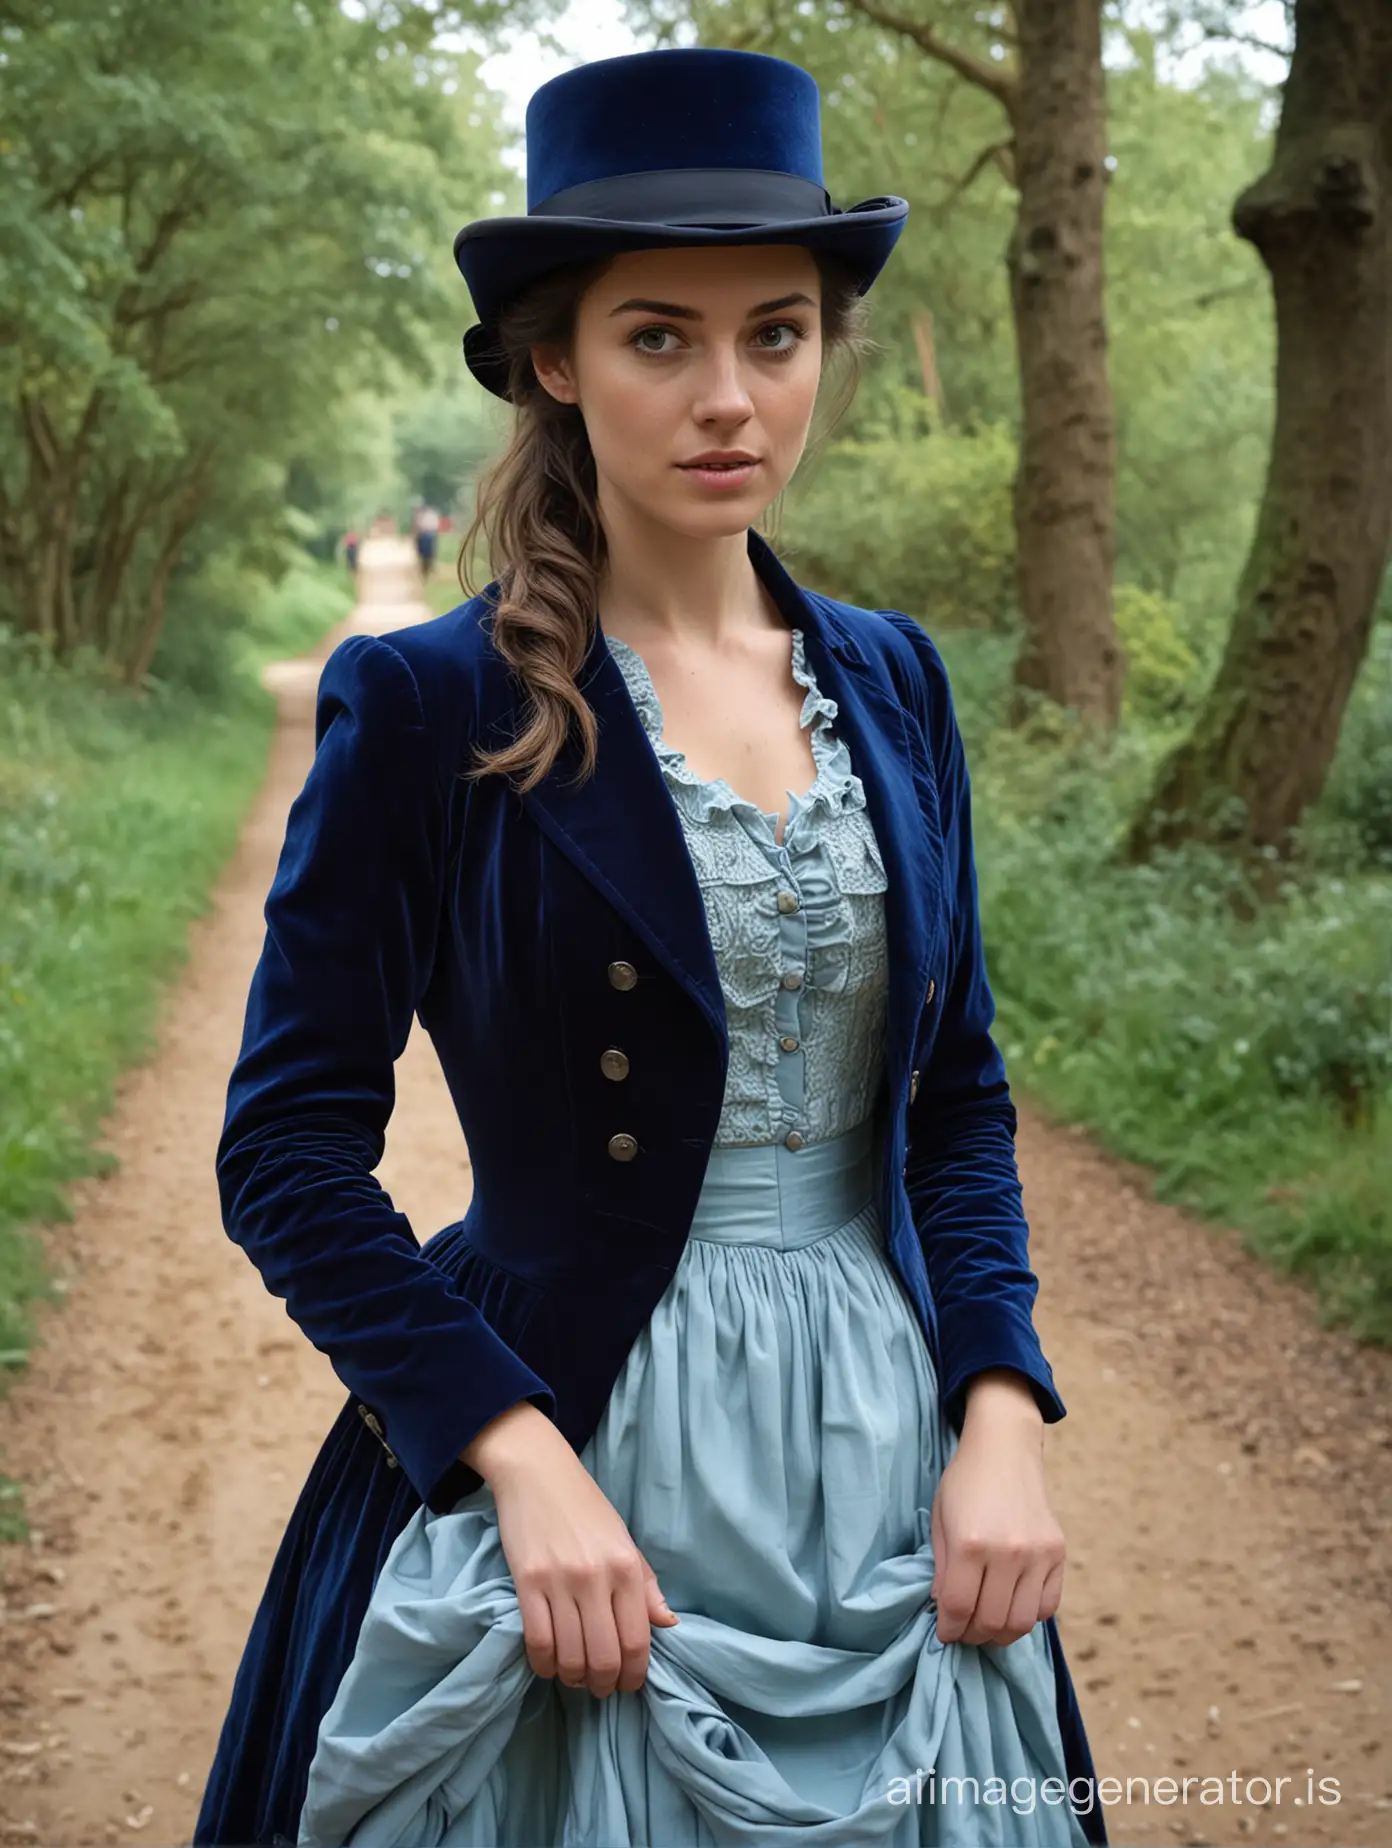 First plan of young and attractive English lady, Regency period, riding a horse on a dirt path surrounded by trees, worried and sad expression. Glances slightly backwards. Wears a dark blue hat and a short velvet jacket of the same color over a light blue dress